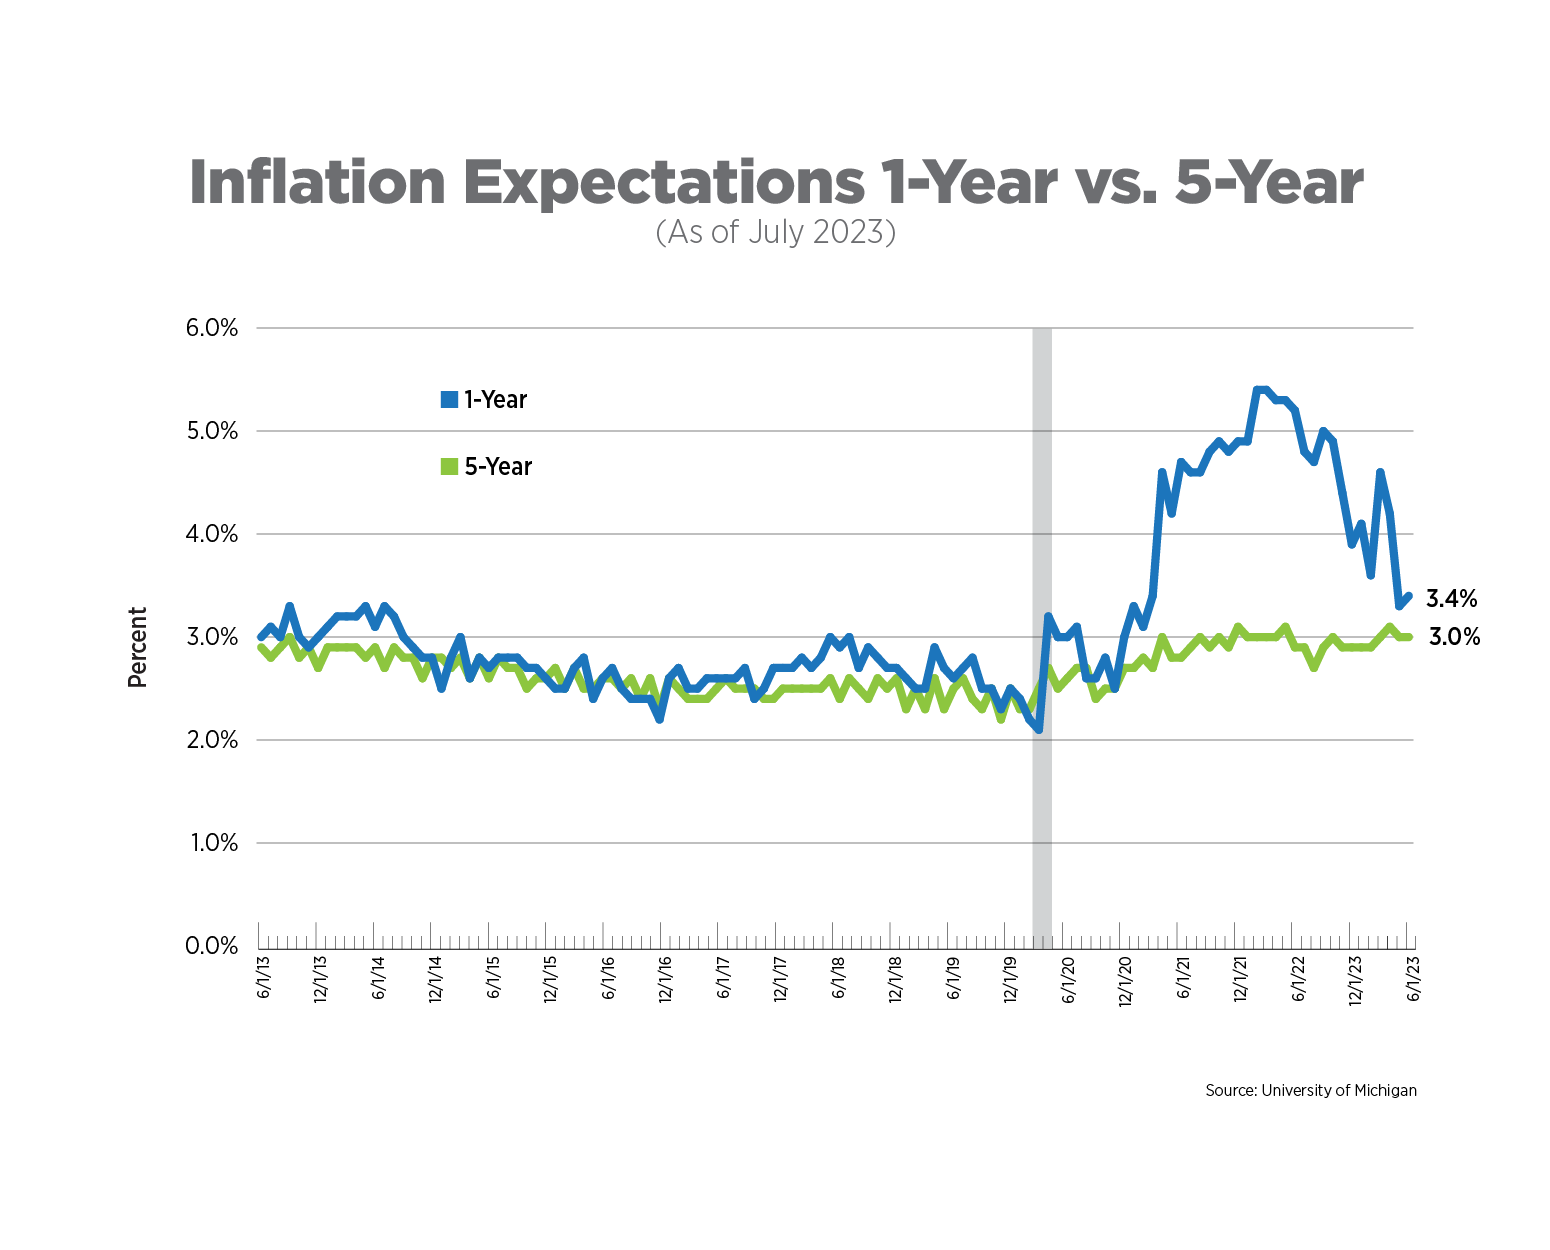 inflation expectations 1-year vs 5-year